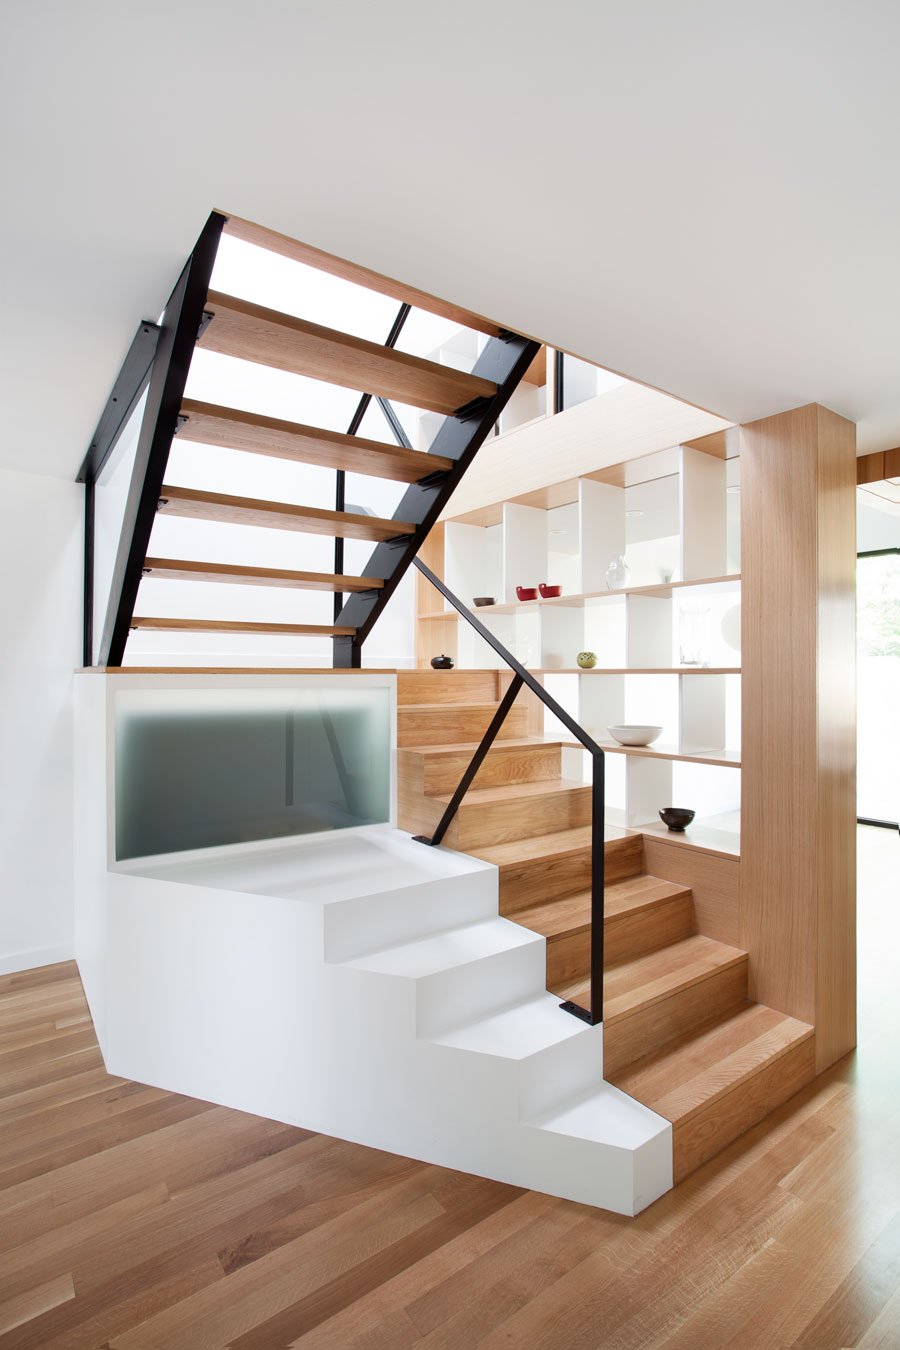 Wooden Stircase Glass Stylish Wooden Staircase With Iron Glass Railing On Wooden Striped Floor Beside Open Built In Storage Of Chambord Residence Interior Design Creative House With Wood Exteriors And Interior Decorations